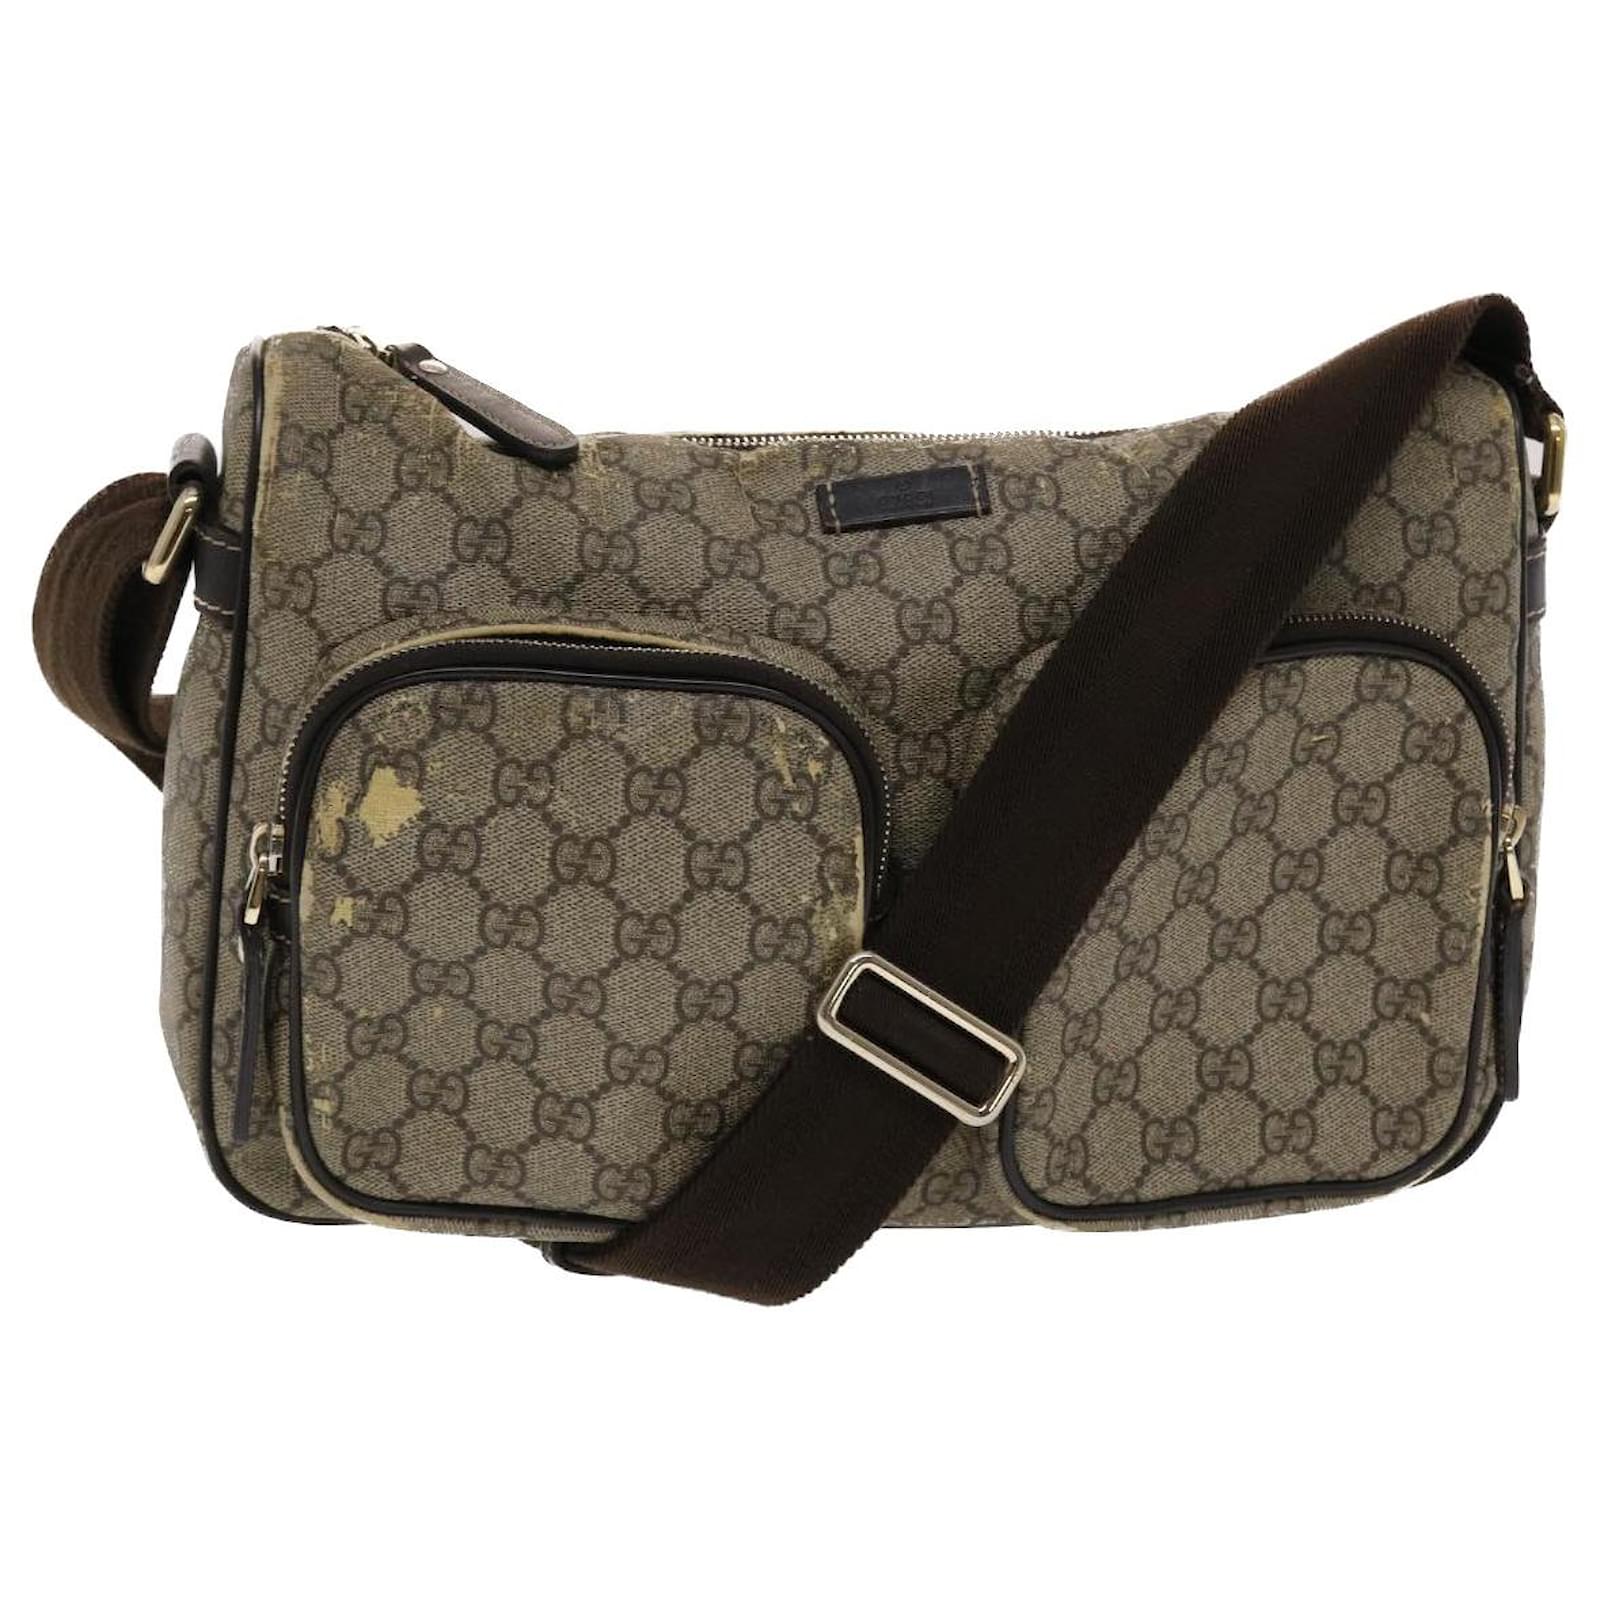 Gucci Dark Brown/Beige GG Supreme Canvas and Leather Messenger Bag Gucci |  The Luxury Closet